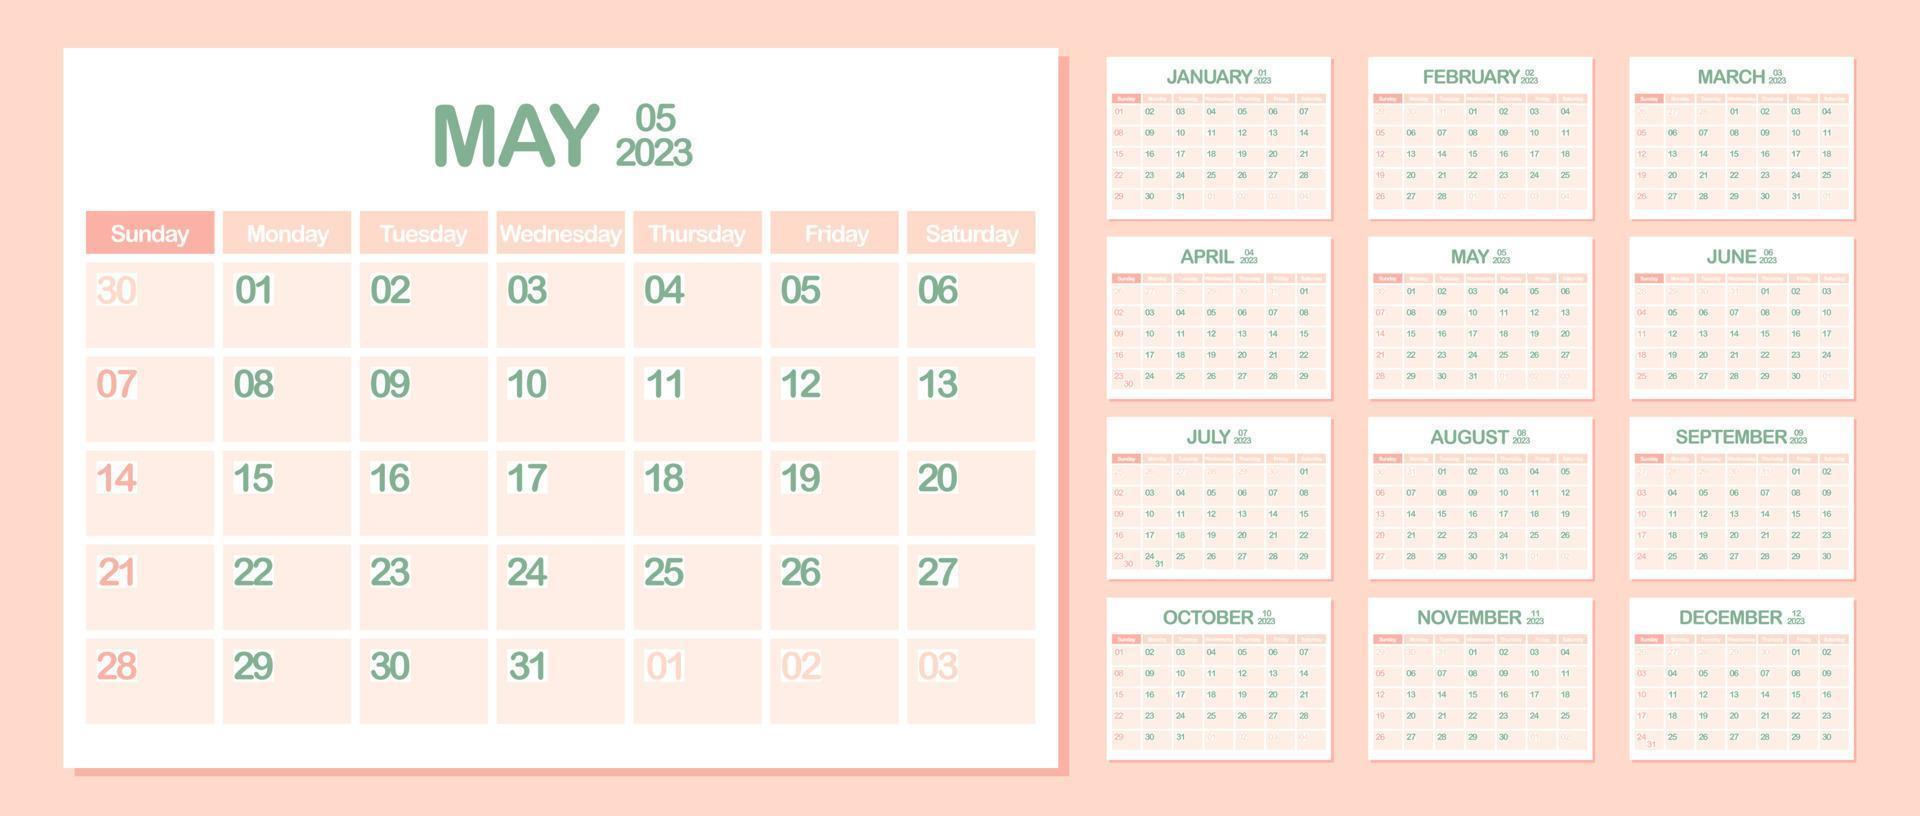 Wall Calendar 2023. May. Week Starts on Sunday. Monthly calendar template. Design Corporate planner. Landscape orientation. Office business planning. Pastel color. Vector illustration